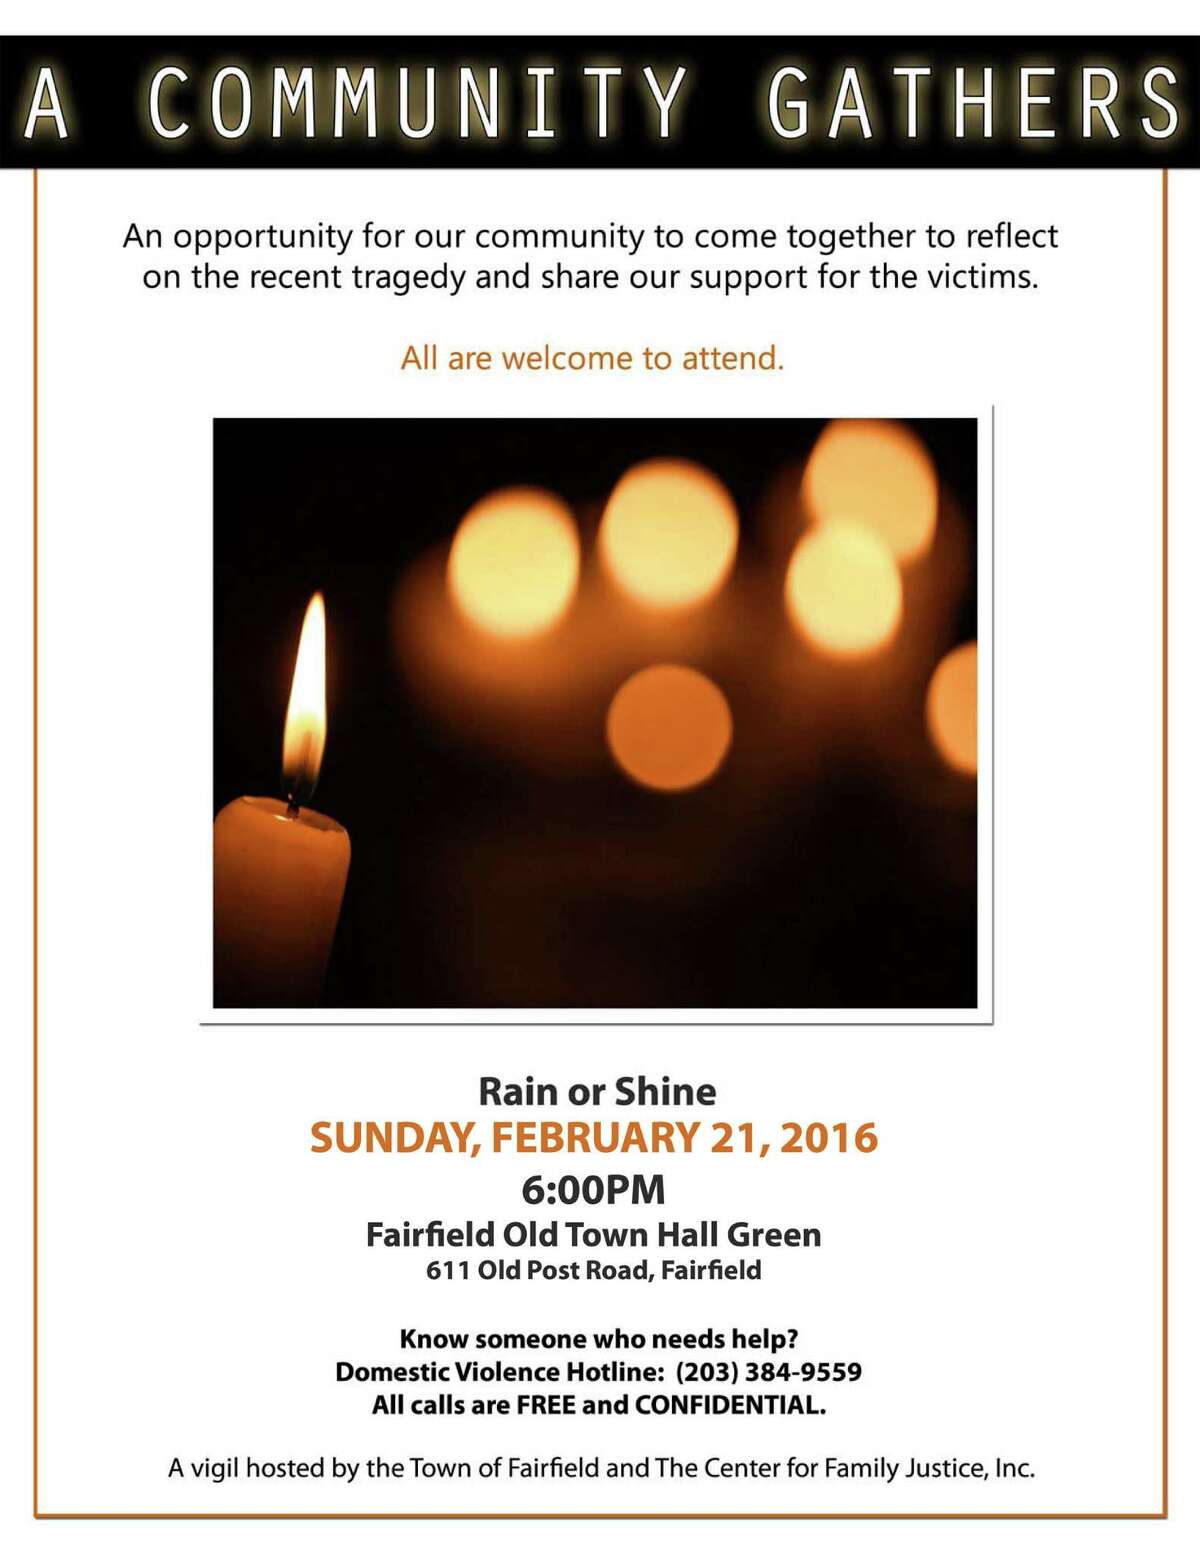 A flyer for a community vigil for victims of domestic violence planned for Sunday at the the Old Town Hall Green in Fairfield, Conn. The Andrews family is not endorsing and has no affiliation with the vigil.